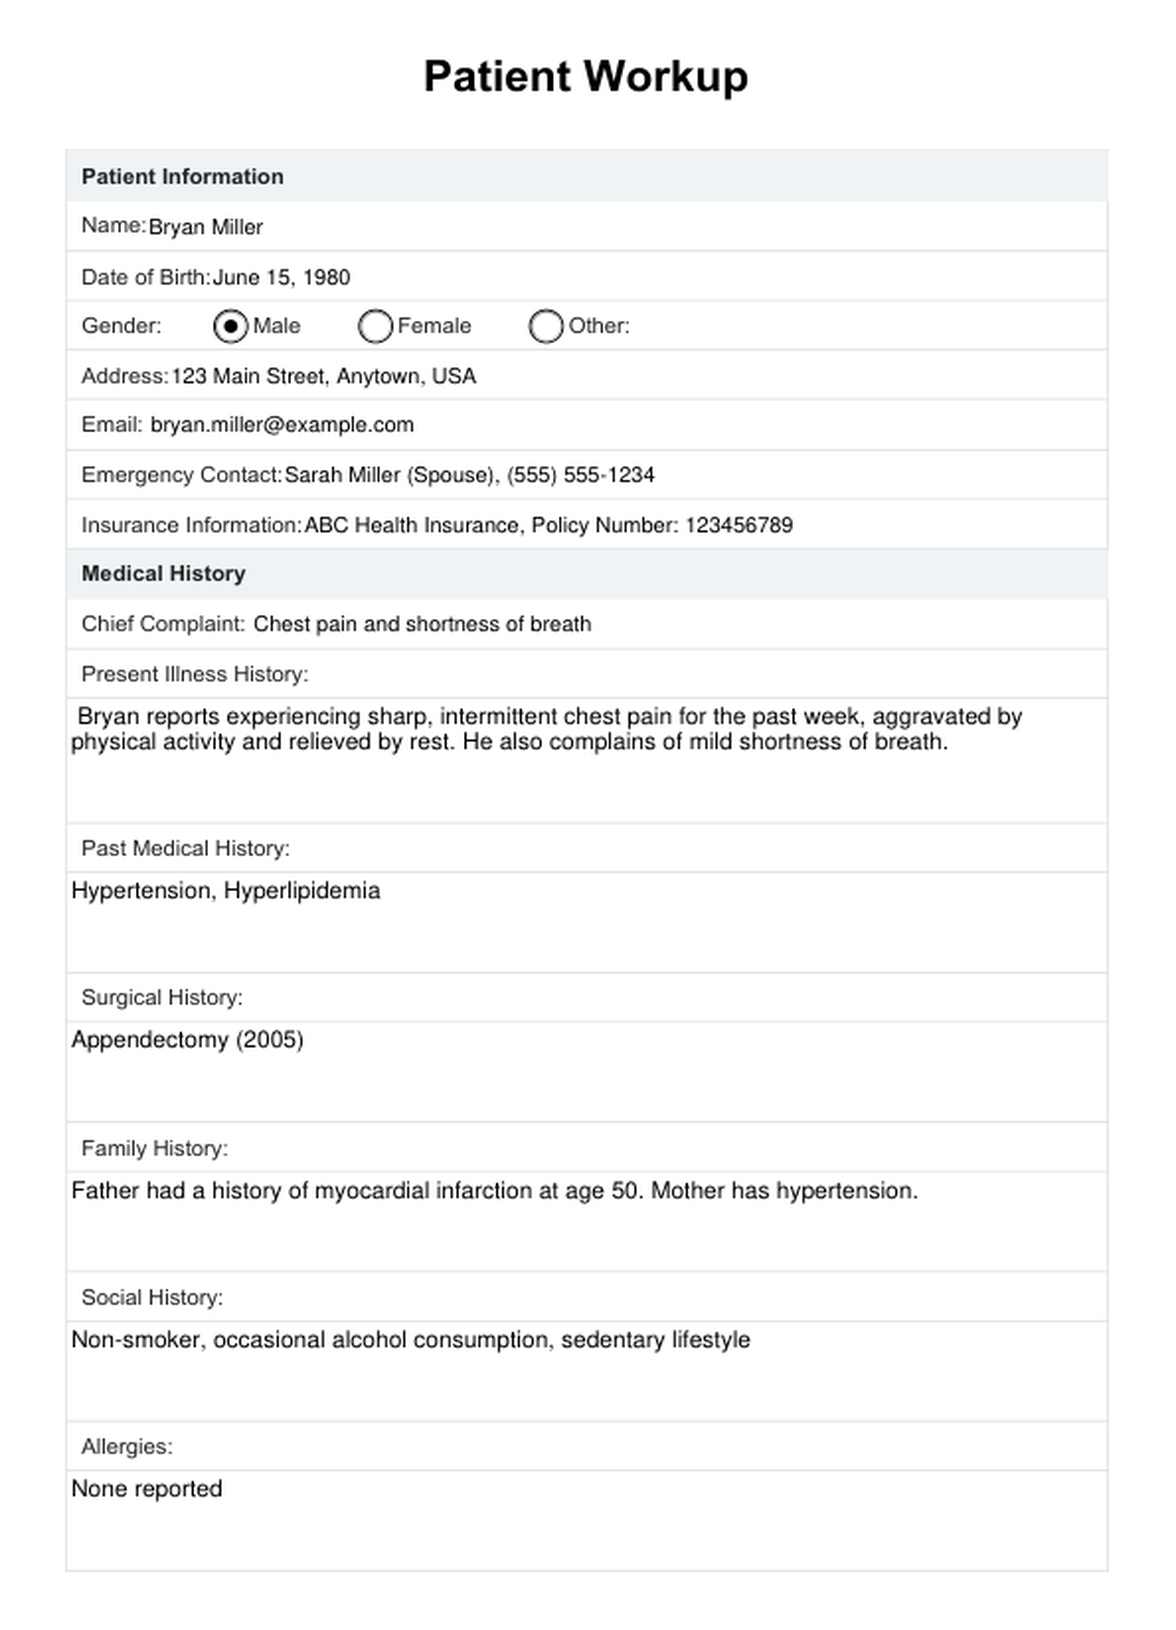 Patient Workup Template PDF Example